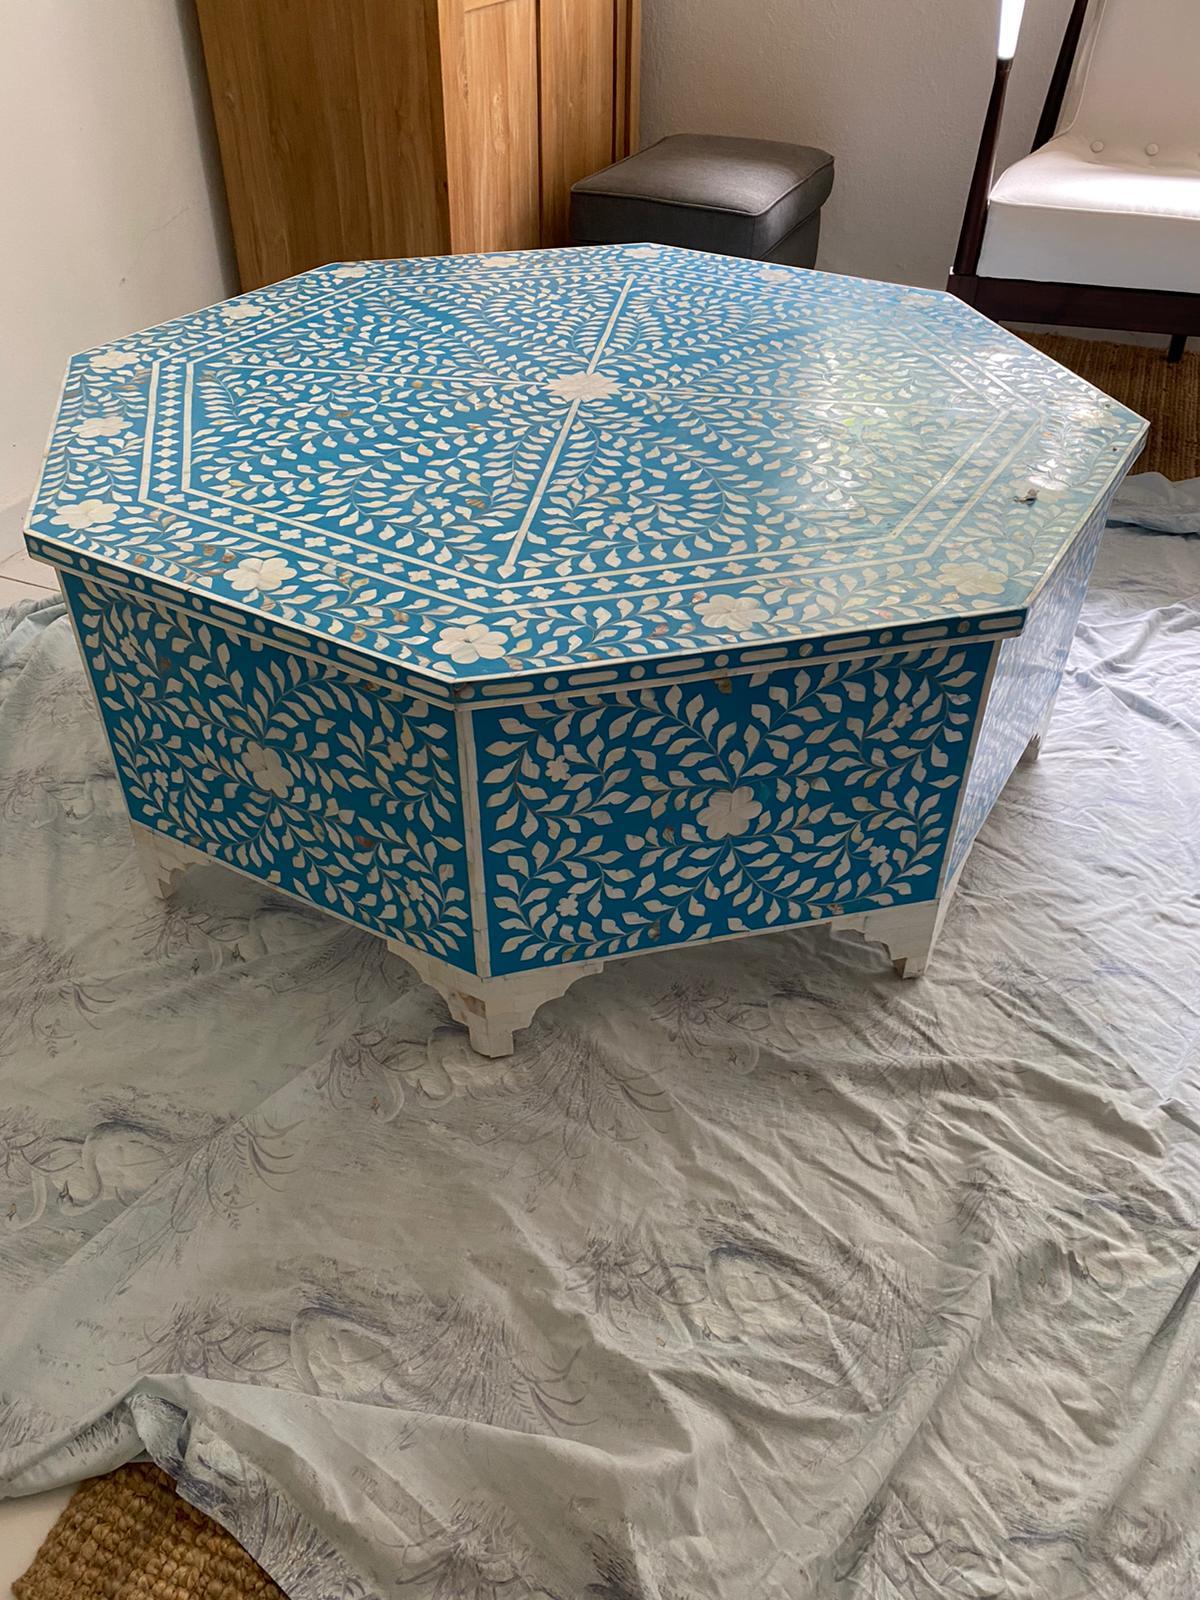 This impressive octagonal-shaped coffee table in mother of pearl comes from Udaipur, India in Rajasthan and will bring a fabulous focal point to your room. Enjoy a sense of calm through its intricate patterned detail and soothing blue color. The